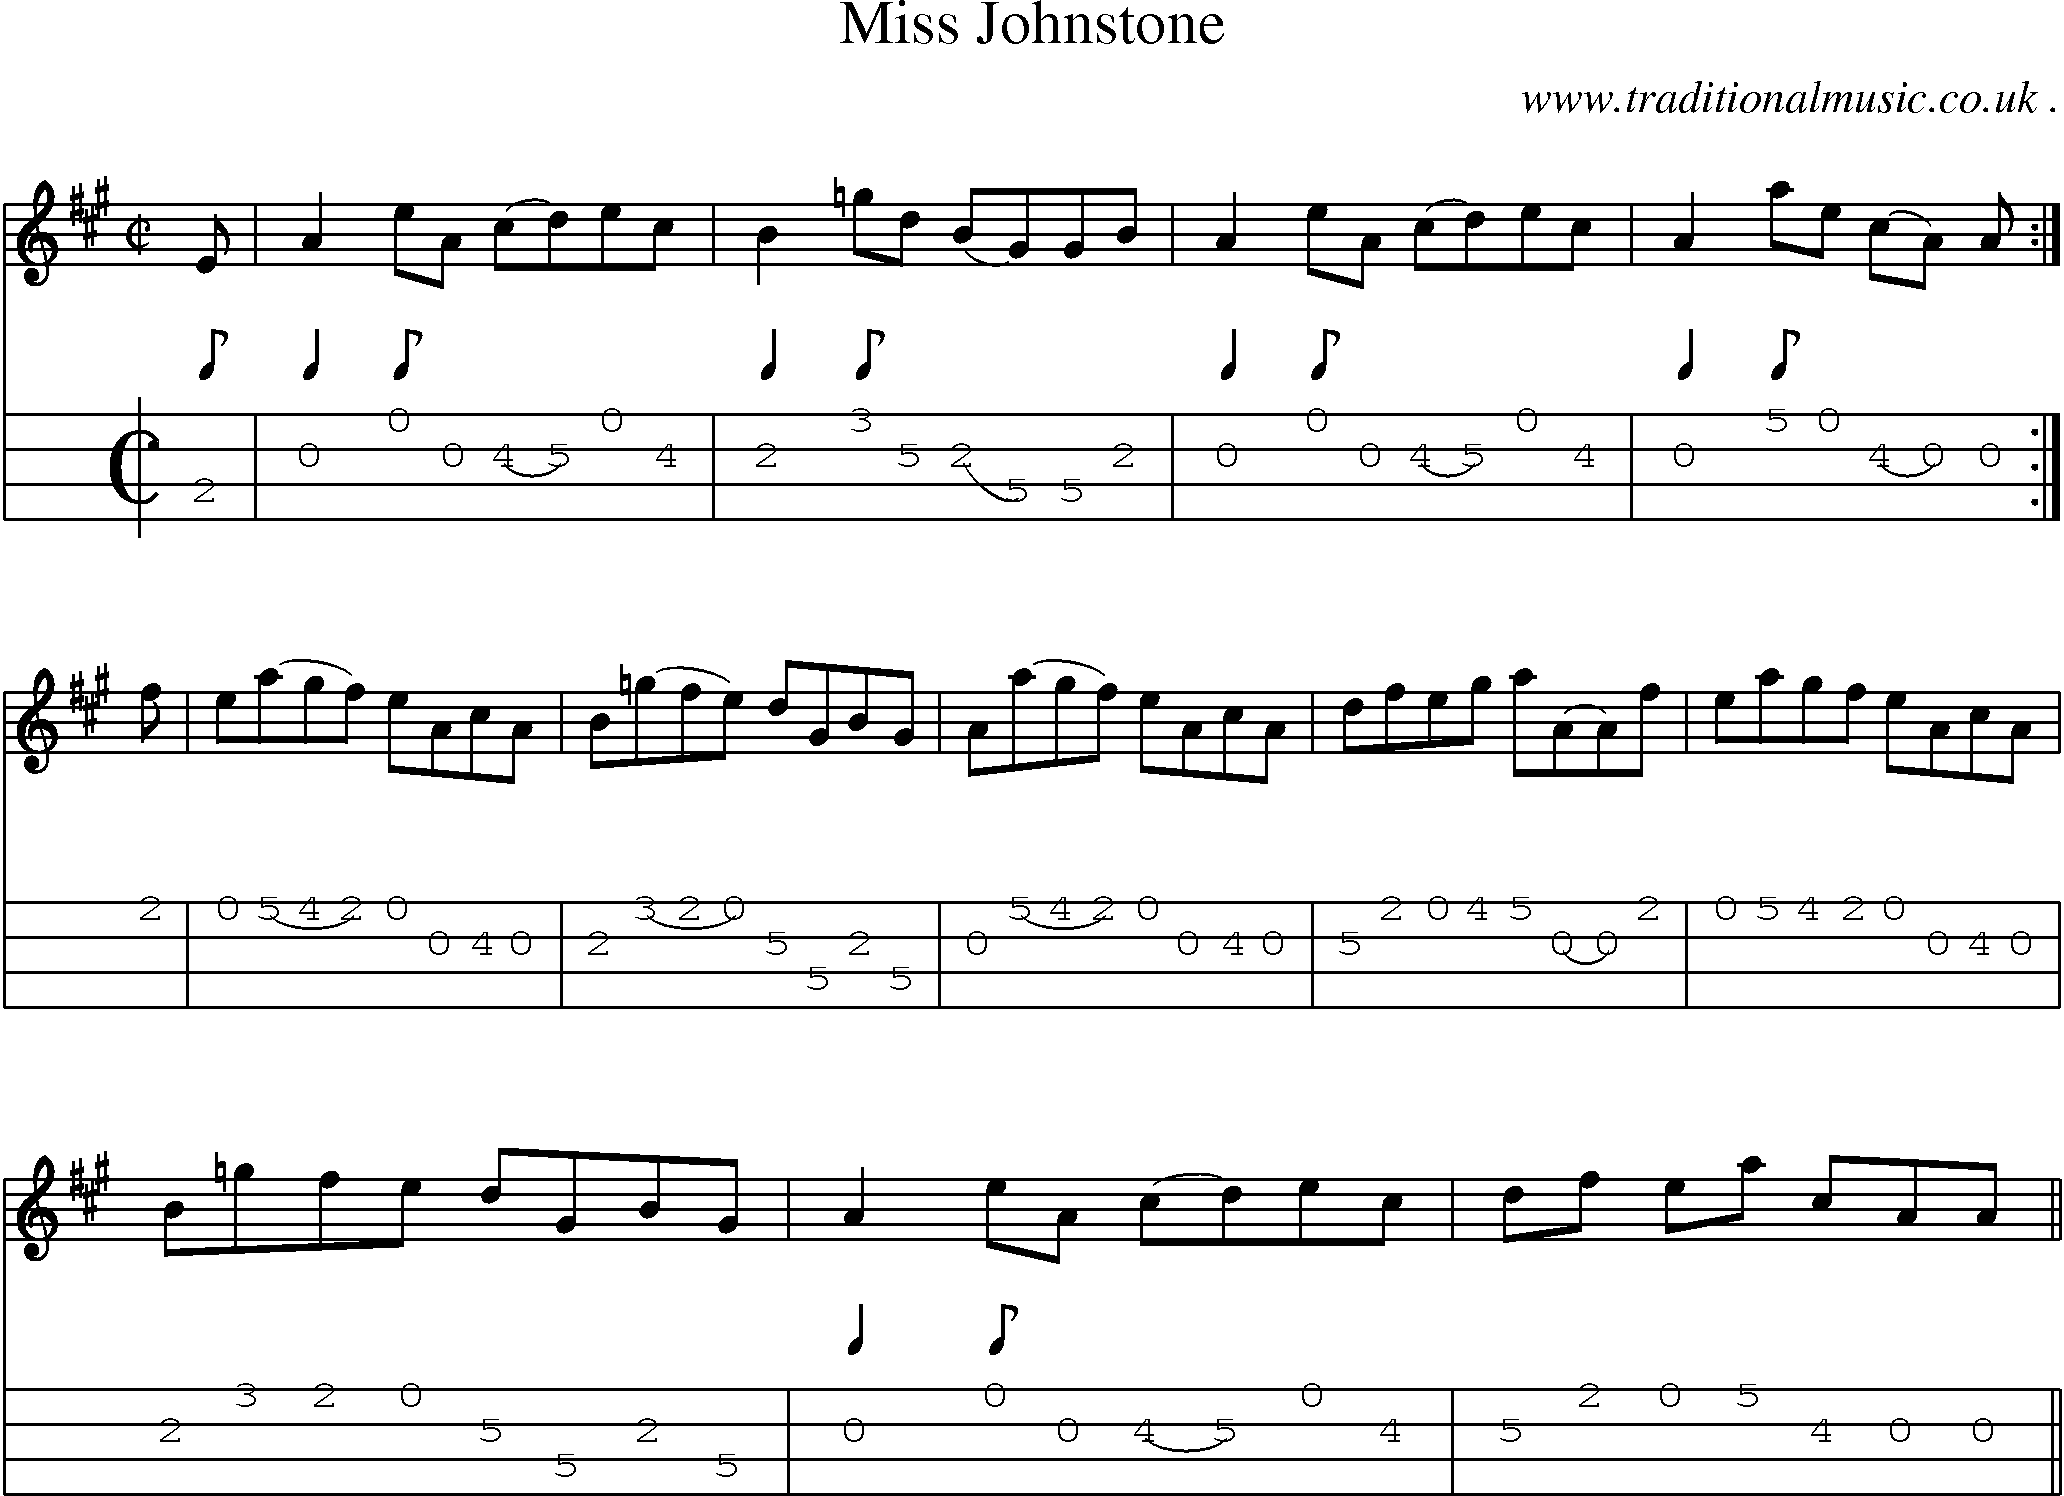 Sheet-music  score, Chords and Mandolin Tabs for Miss Johnstone